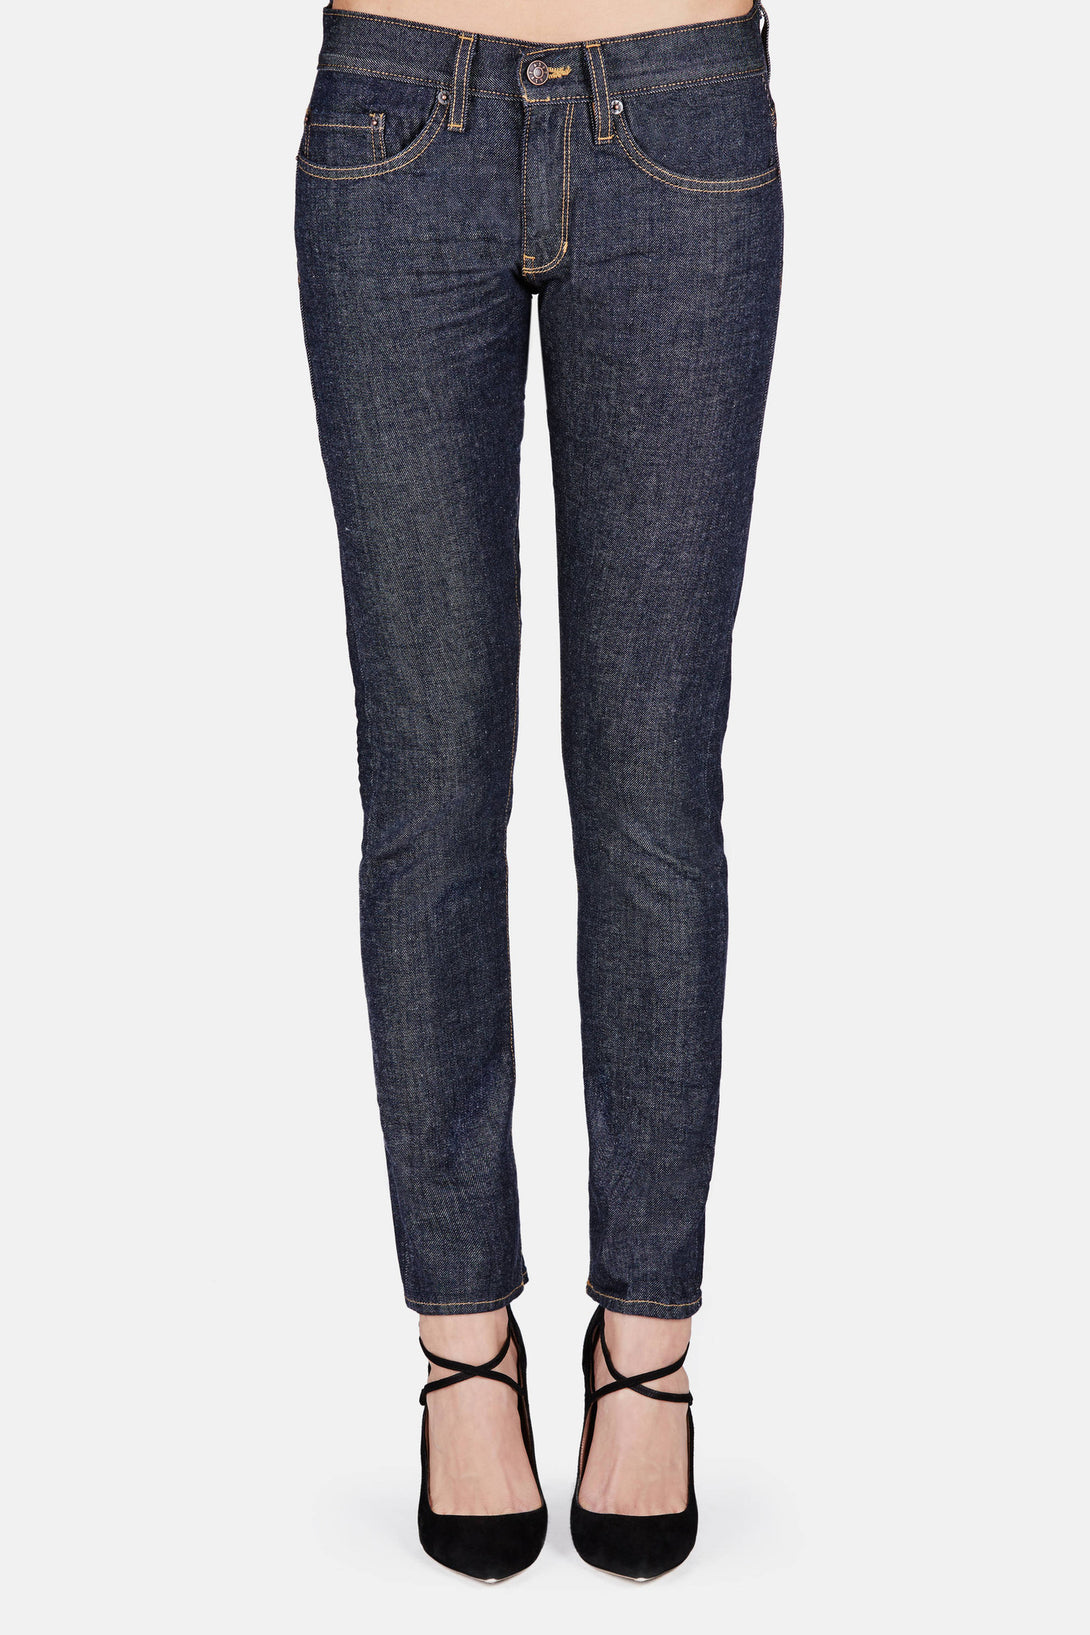 only royal high skinny jeans blue